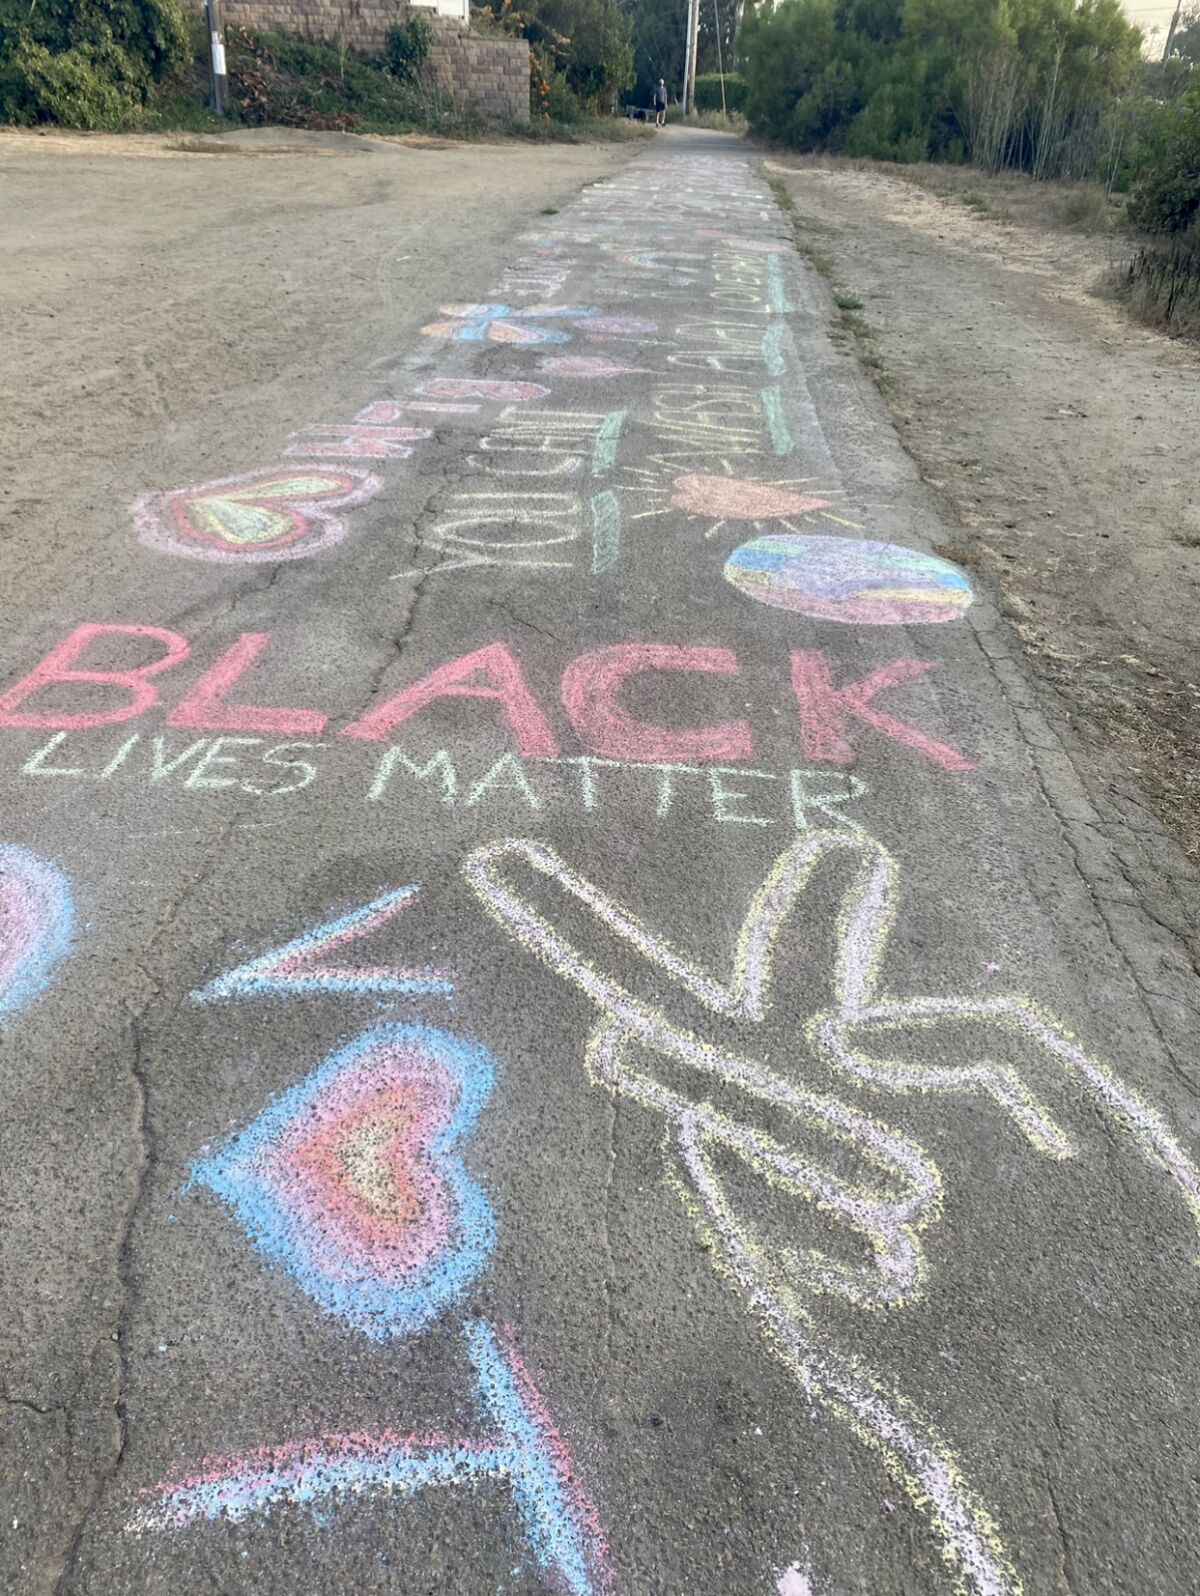 Chalk messages are seen on the La Jolla Bike Path on Sept. 23, a week after the city of San Diego removed similar drawings.